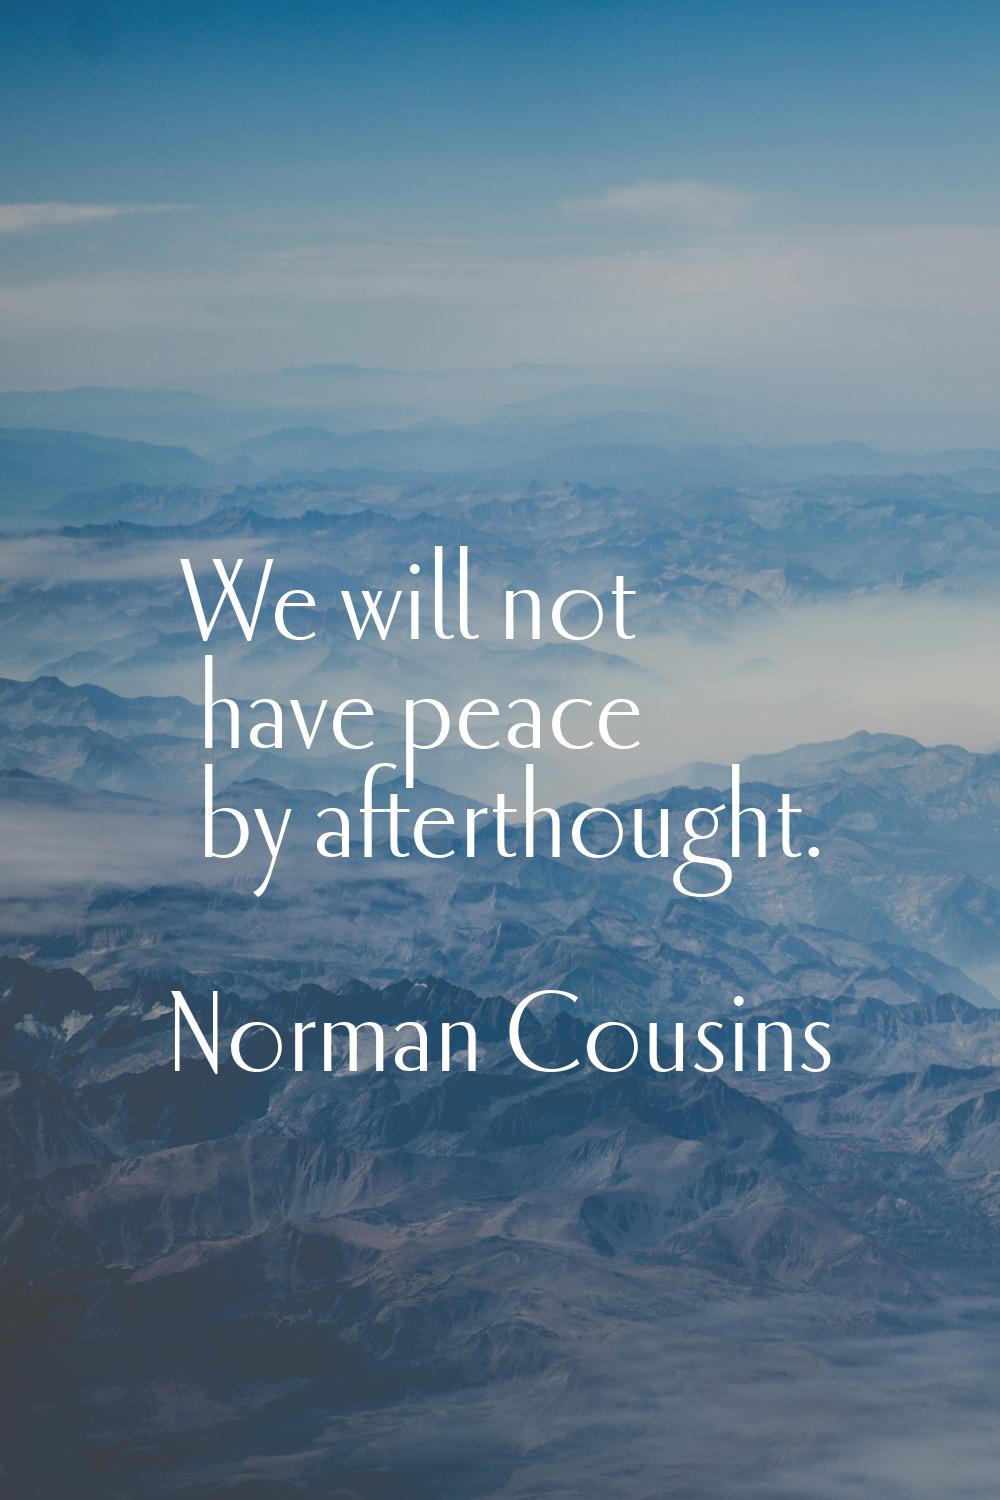 We will not have peace by afterthought.